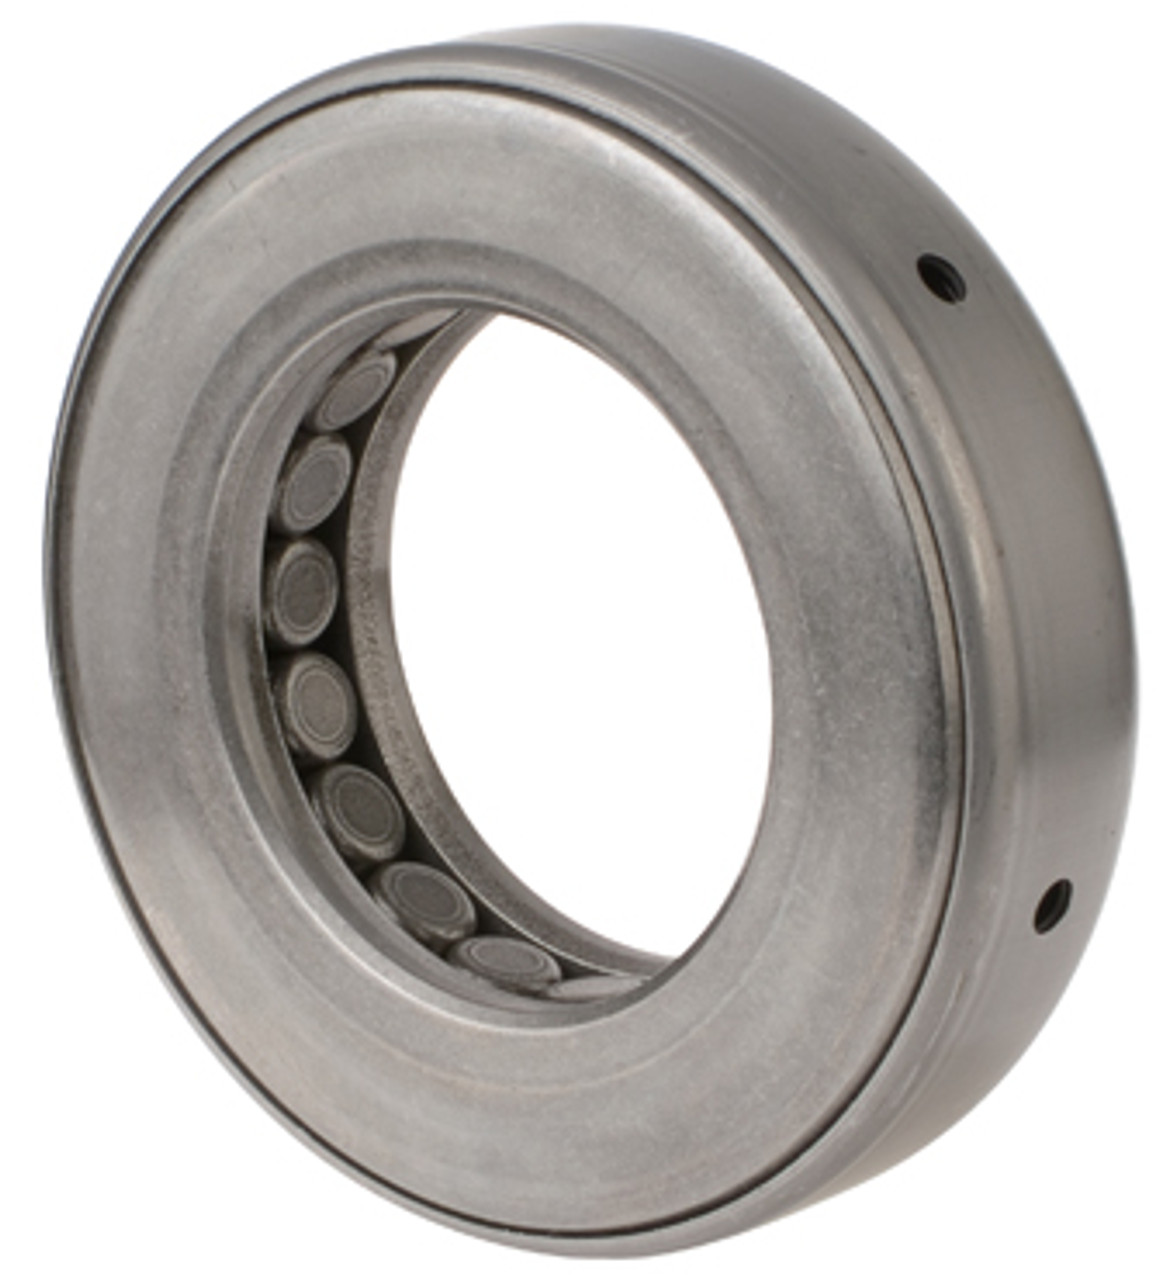 Timken® Stamped Race Thrust Bearing  T199W-904A3